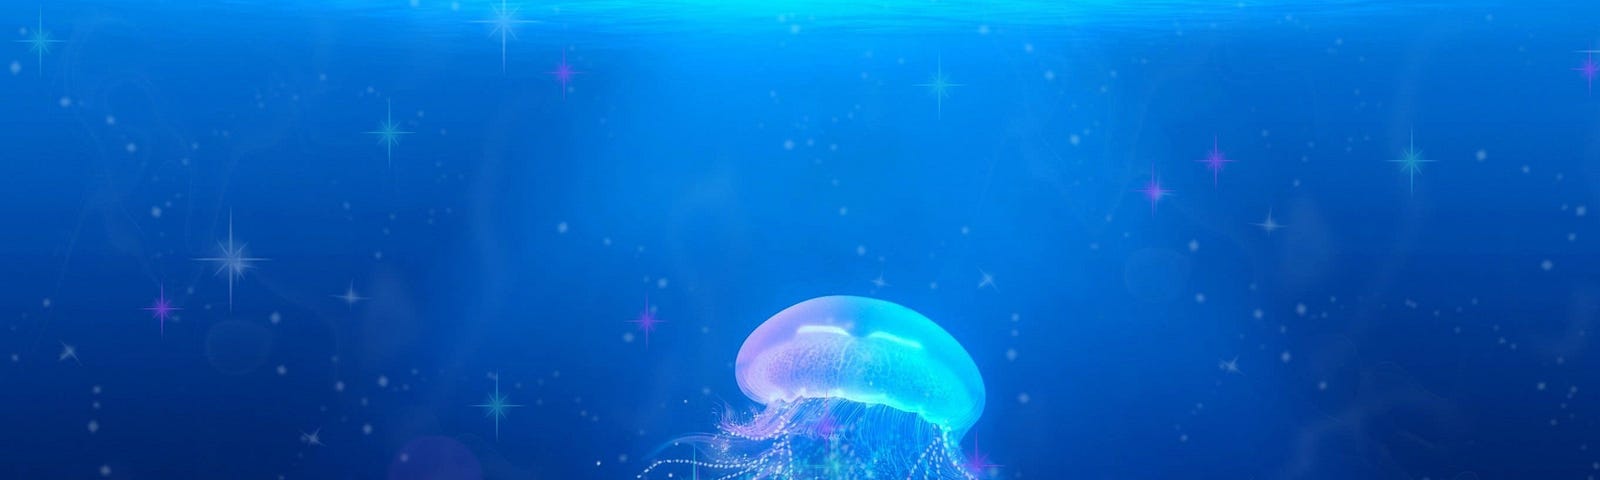 jellyfish with tentacles in the ocean, floating under the glowing surface